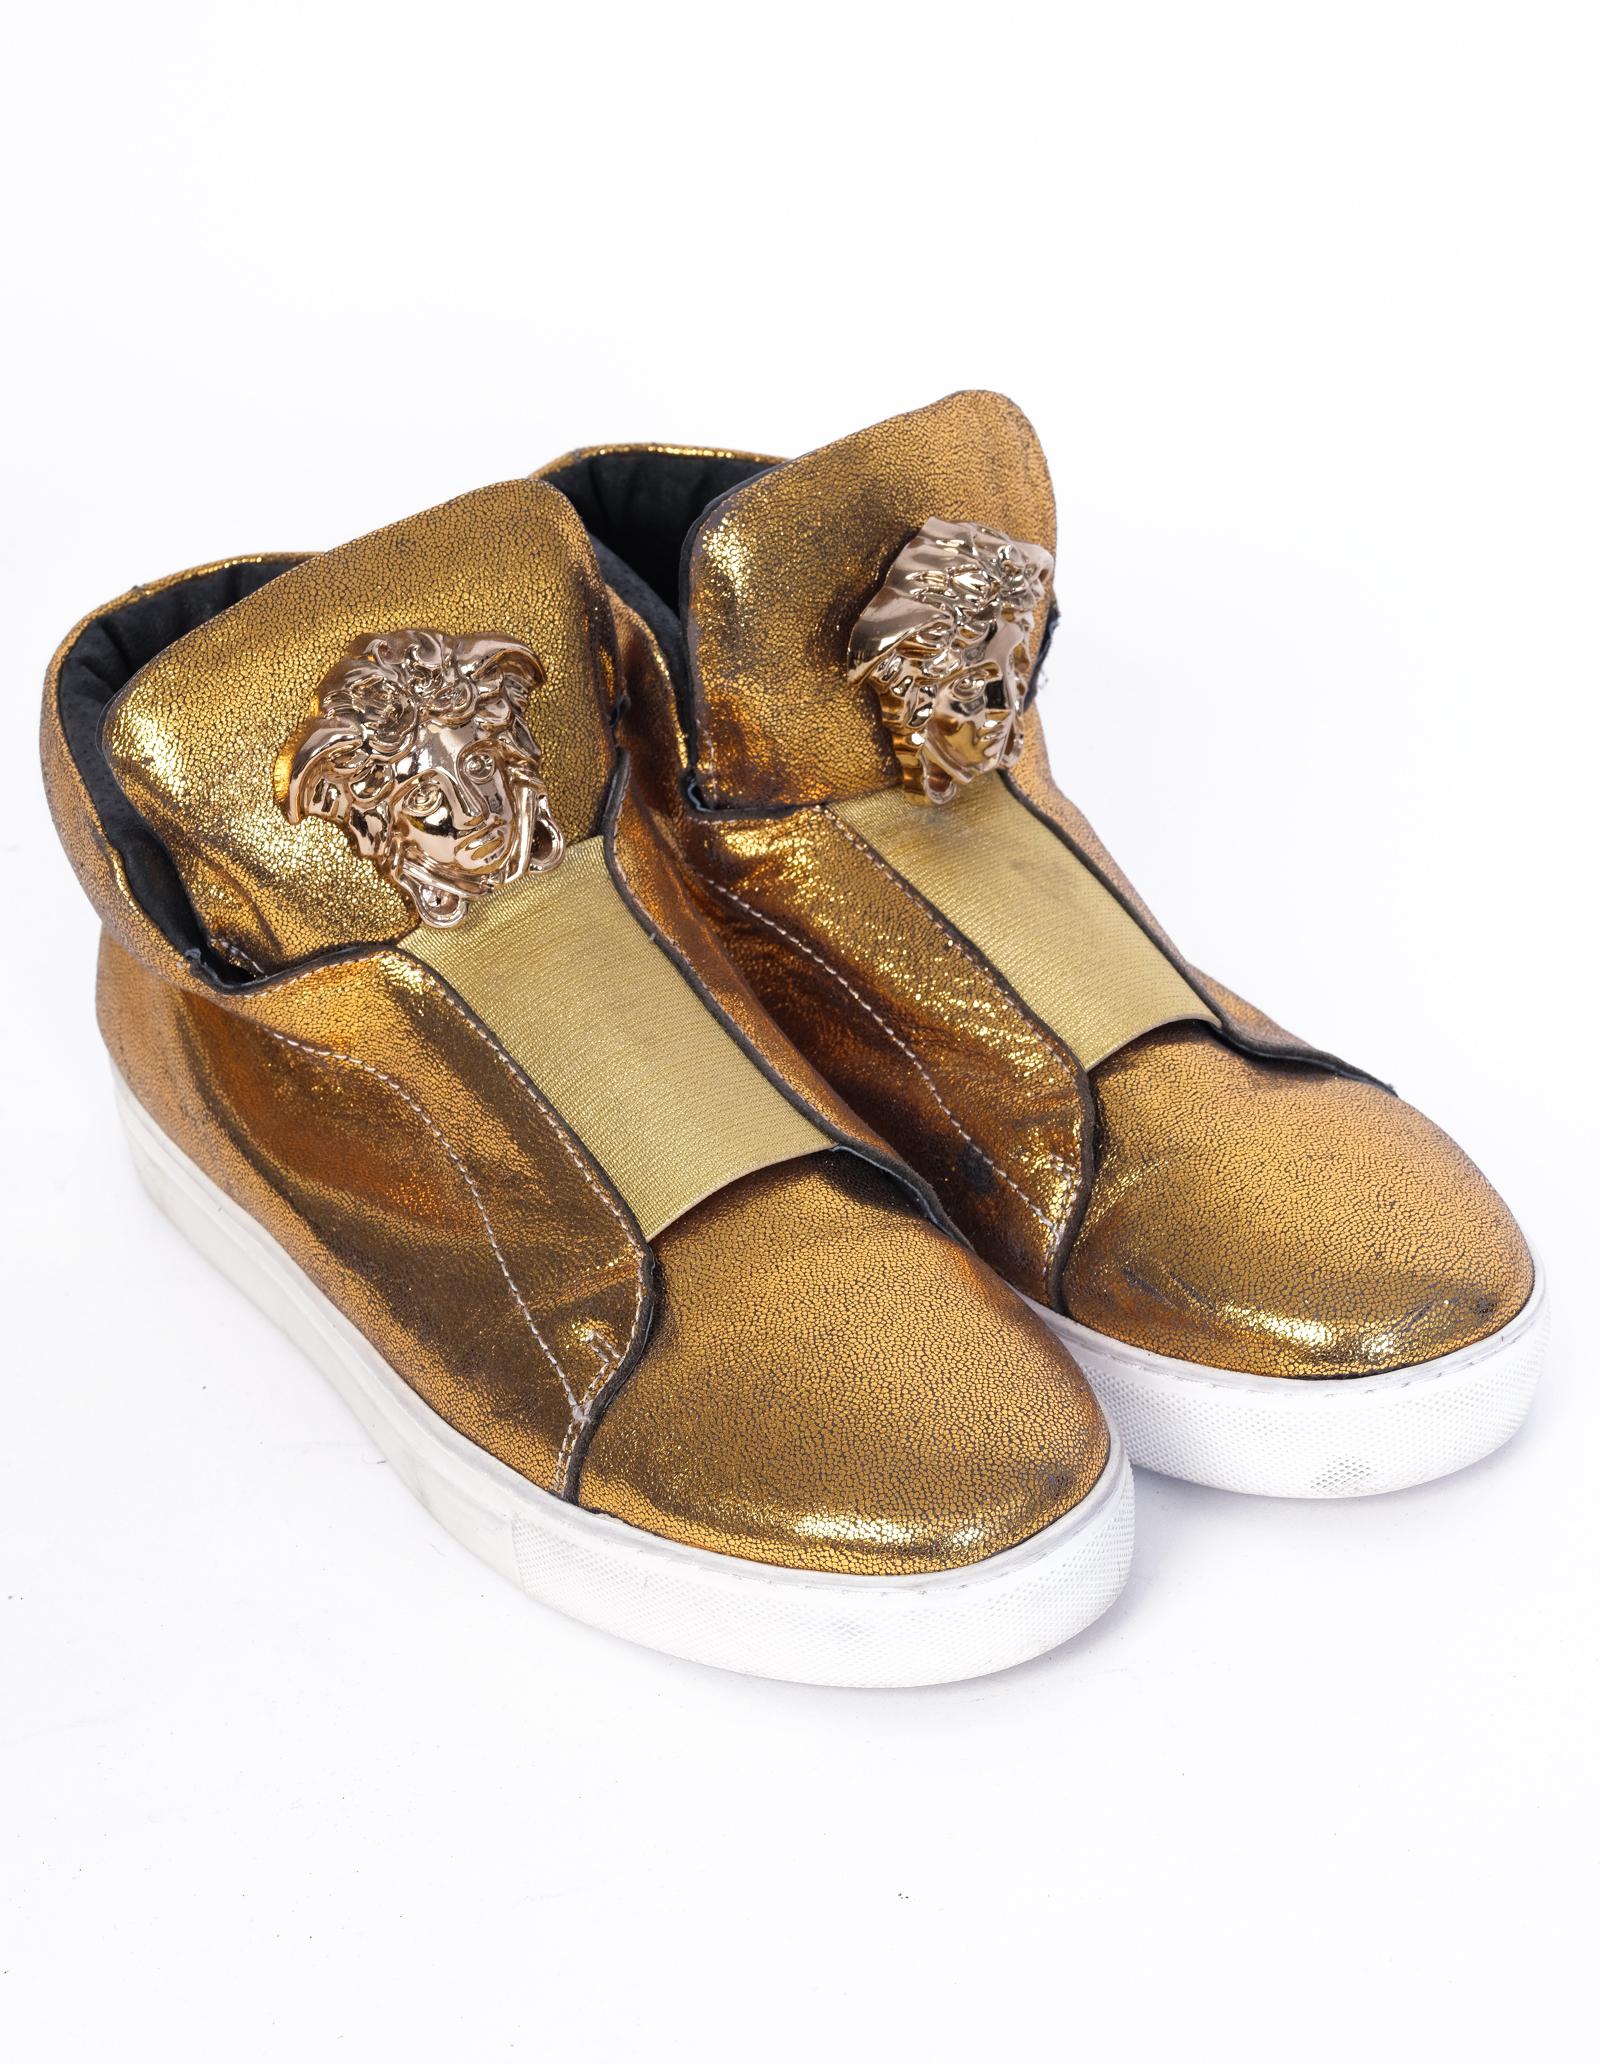 These shoes are made with leather with a metallic gold finish. Featuring the iconic Versace Medusa emblem, white soles and a black interior.

COLOR: Gold & white
ITEM CODE: 188-6A 
MATERIAL: Leather 
SIZE: 43 EU / 10 US
EST. RETAIL: $1500
CONDITION: